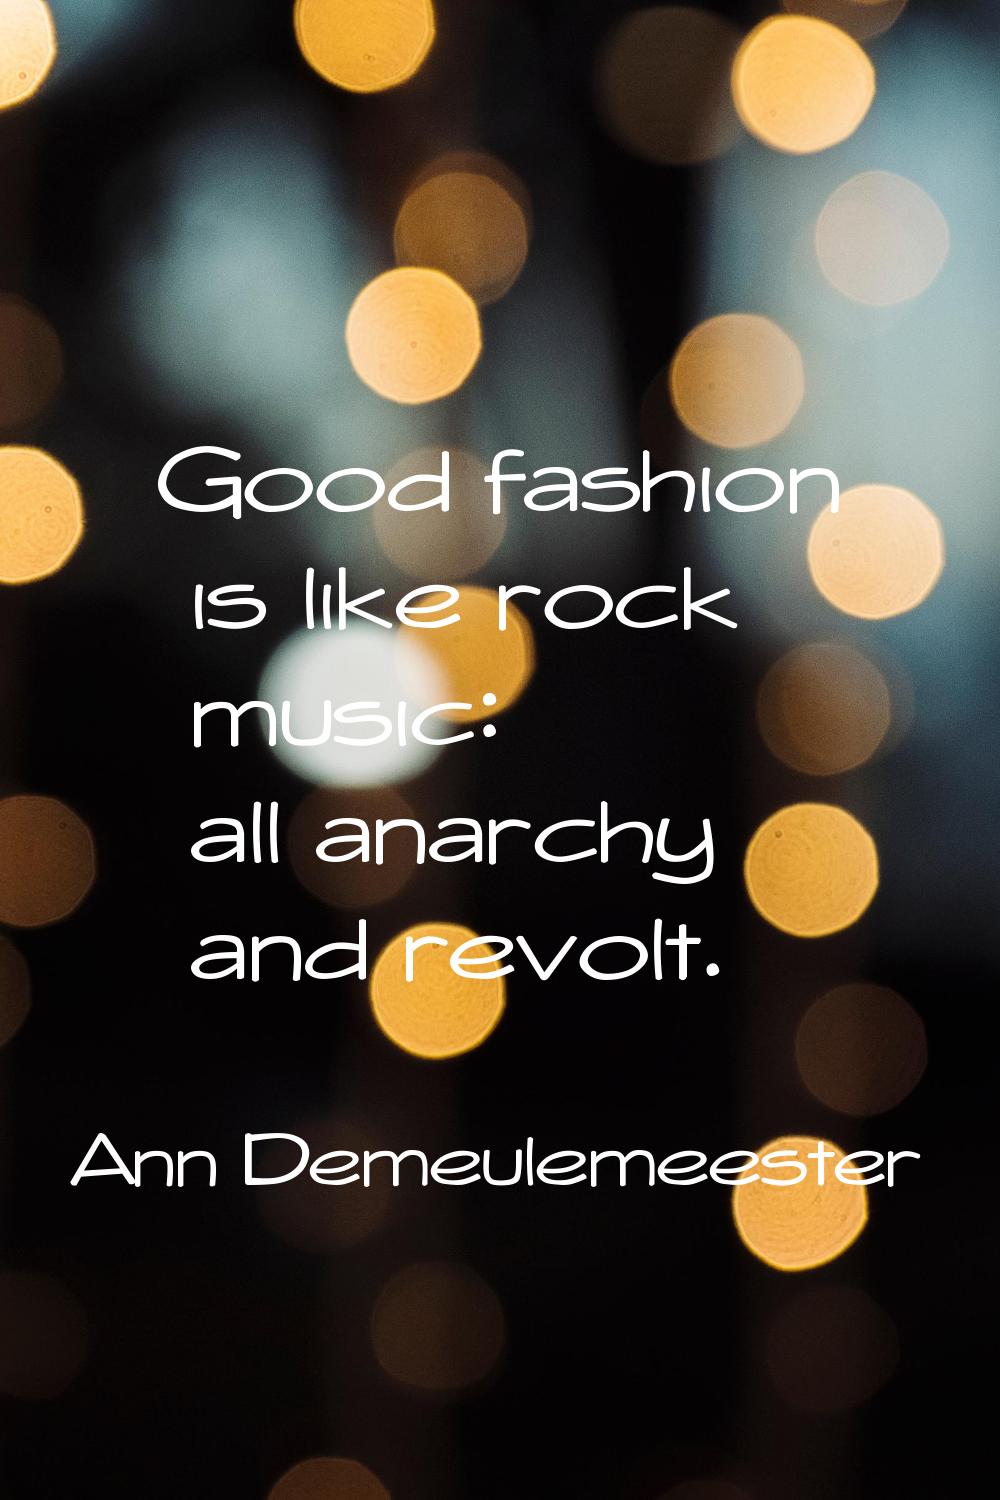 Good fashion is like rock music: all anarchy and revolt.